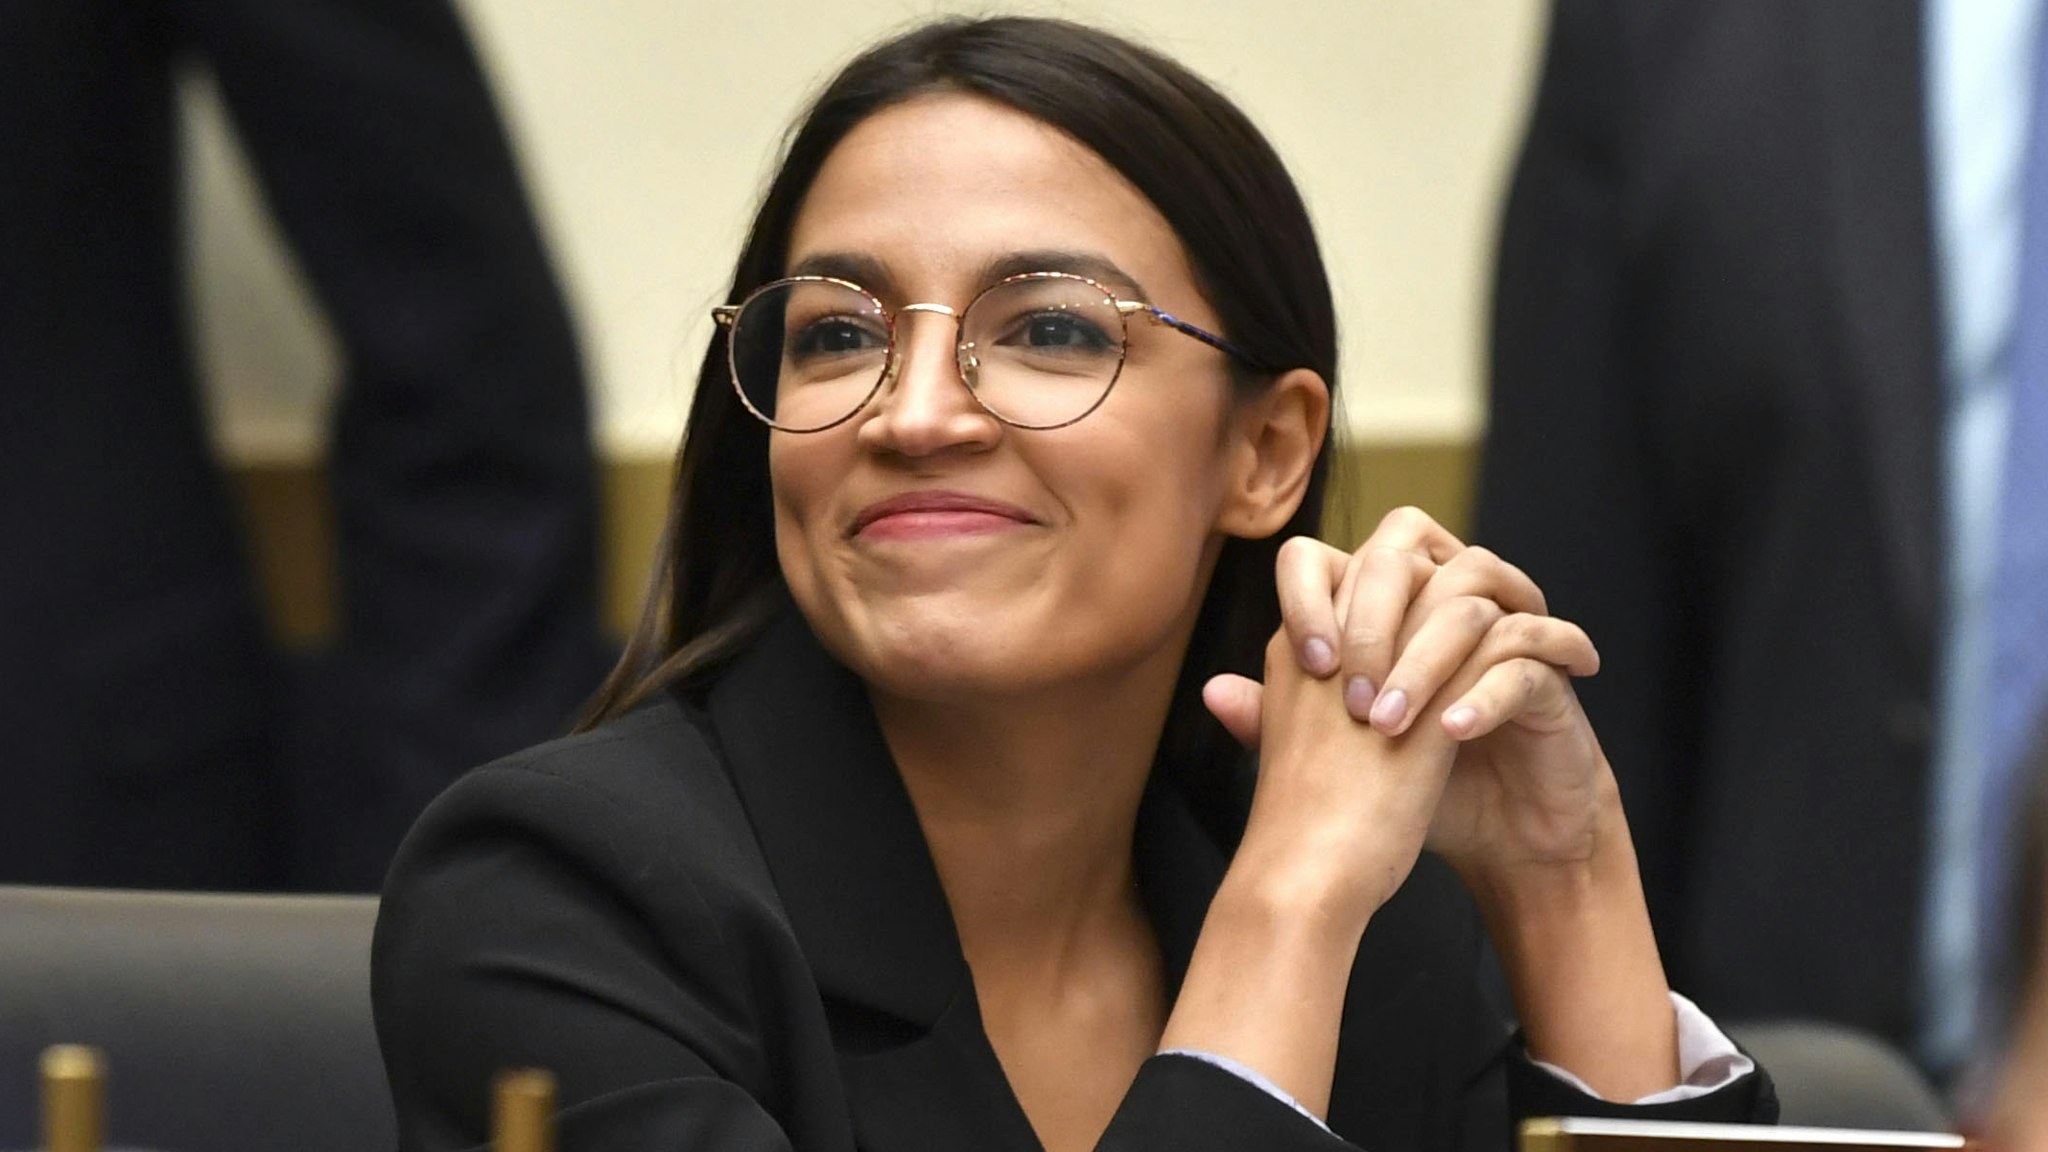 Rep. Alexandria Ocasio-Cortez(D-NY) smiles as Facebook Chairman and CEO Mark Zuckerberg testifies before the House Financial Services Committee on "An Examination of Facebook and Its Impact on the Financial Services and Housing Sectors" in the Rayburn House Office Building in Washington, DC on October 23, 2019.